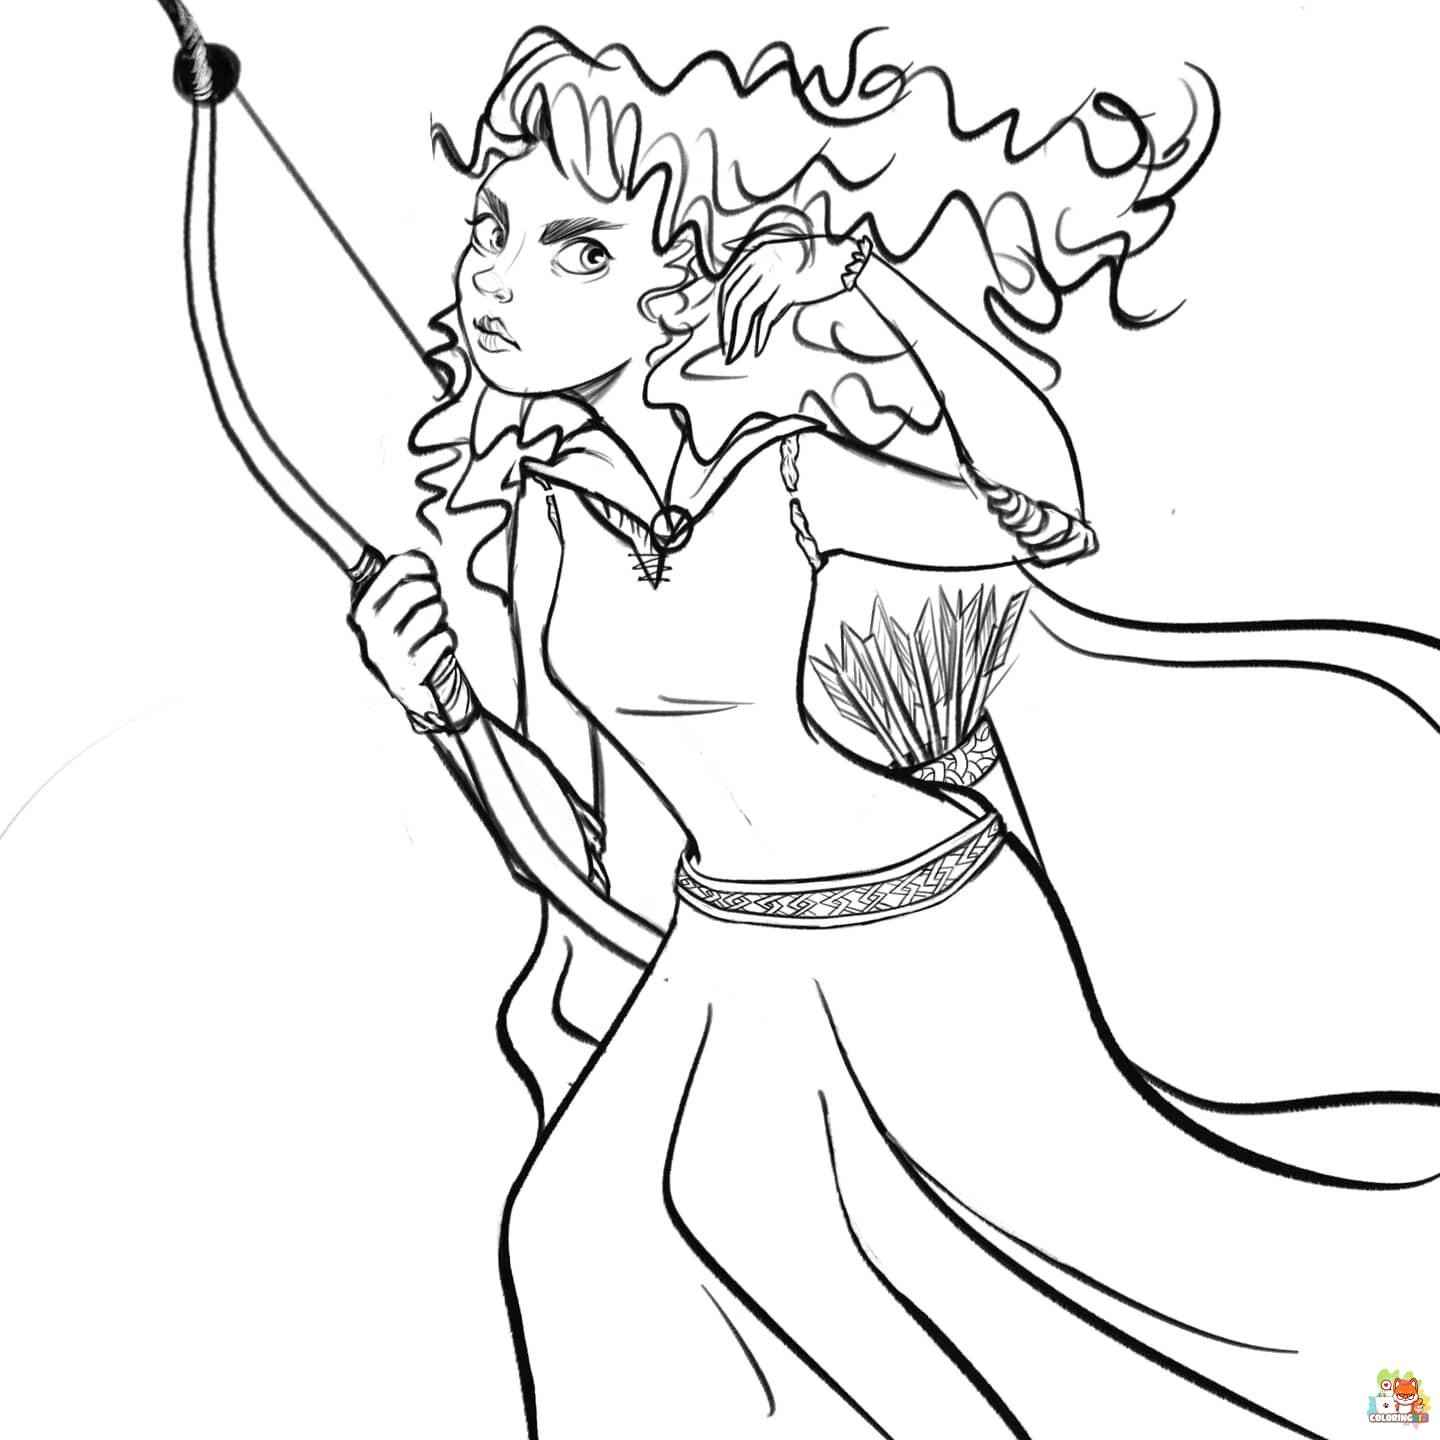 Merida Archery Coloring Pages 1